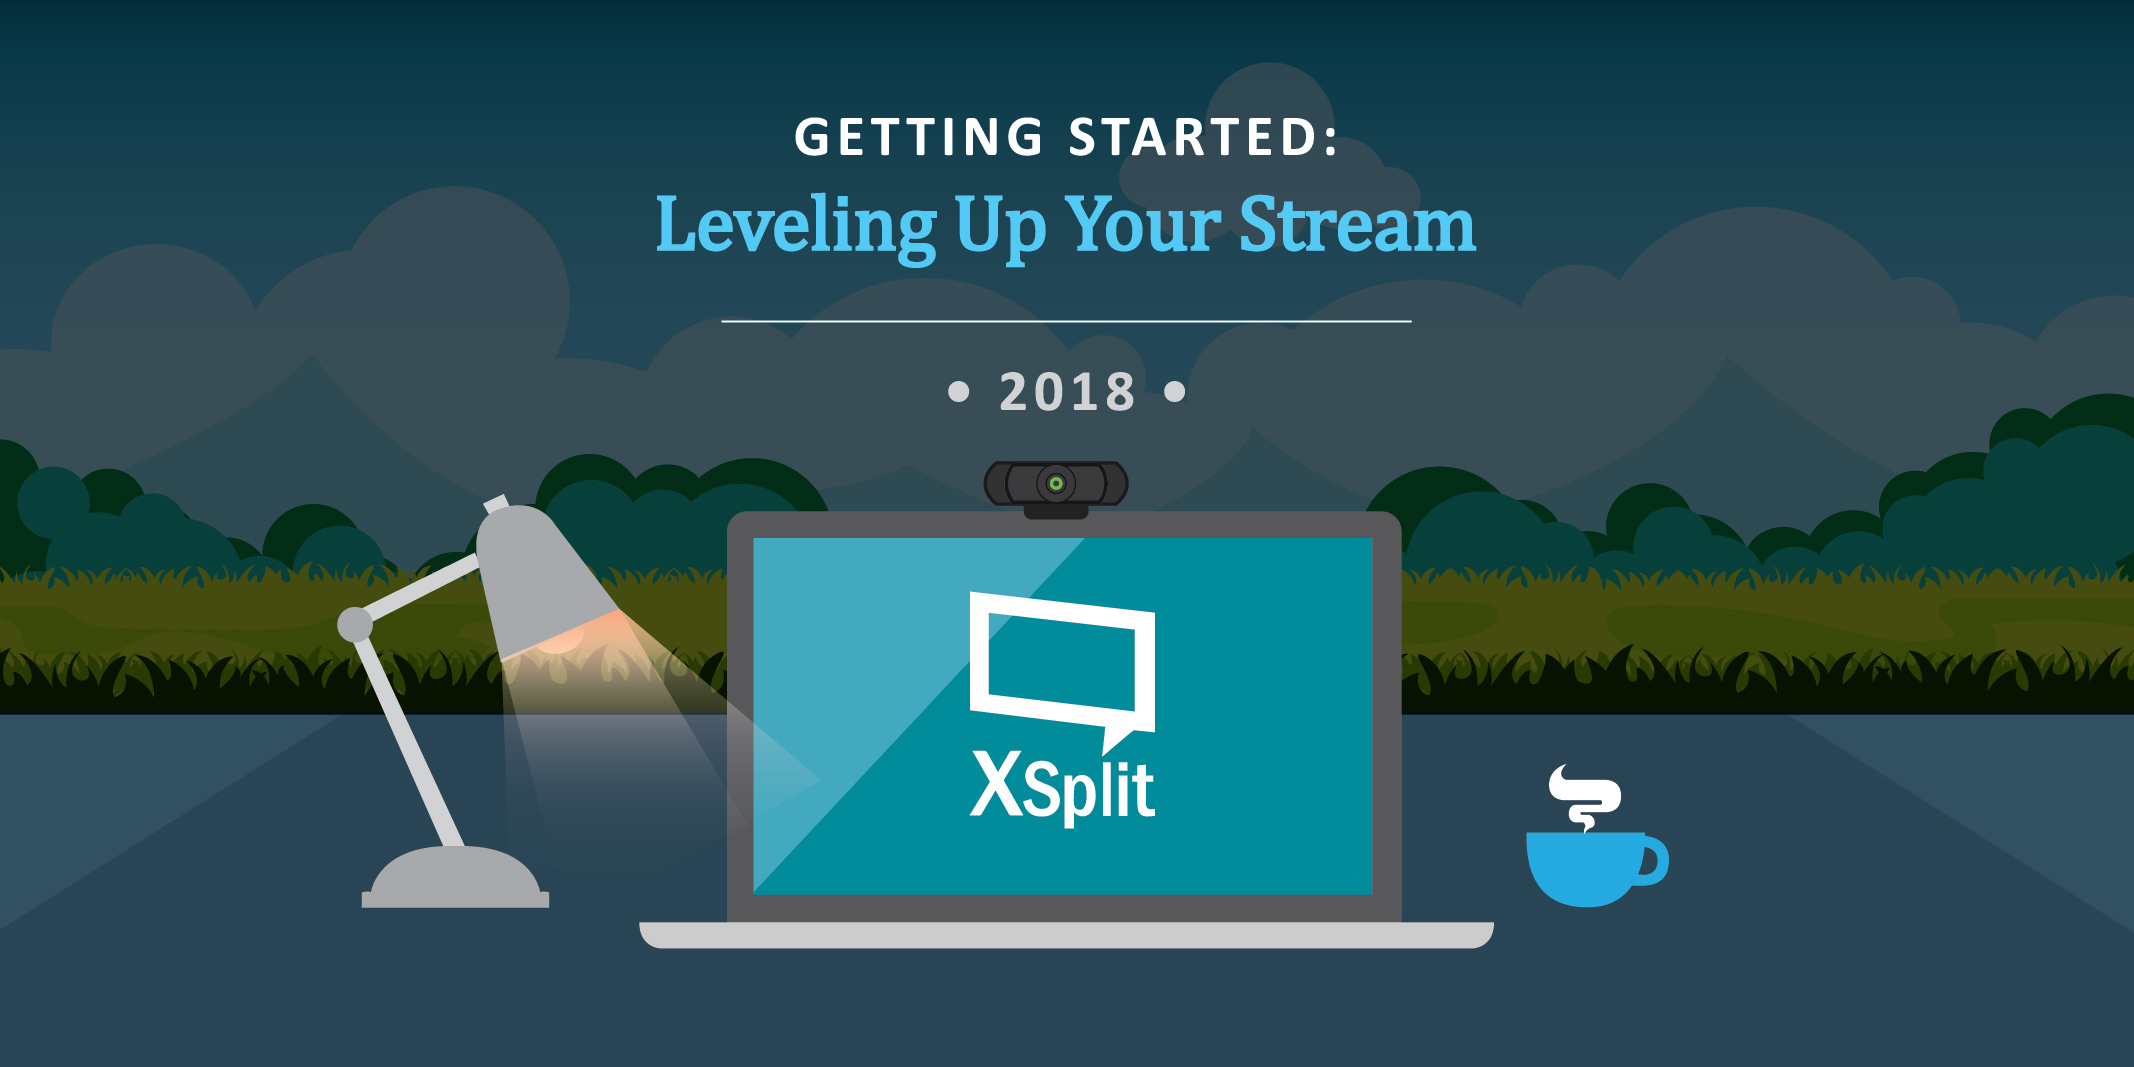 Getting Started Leveling Up Your Stream